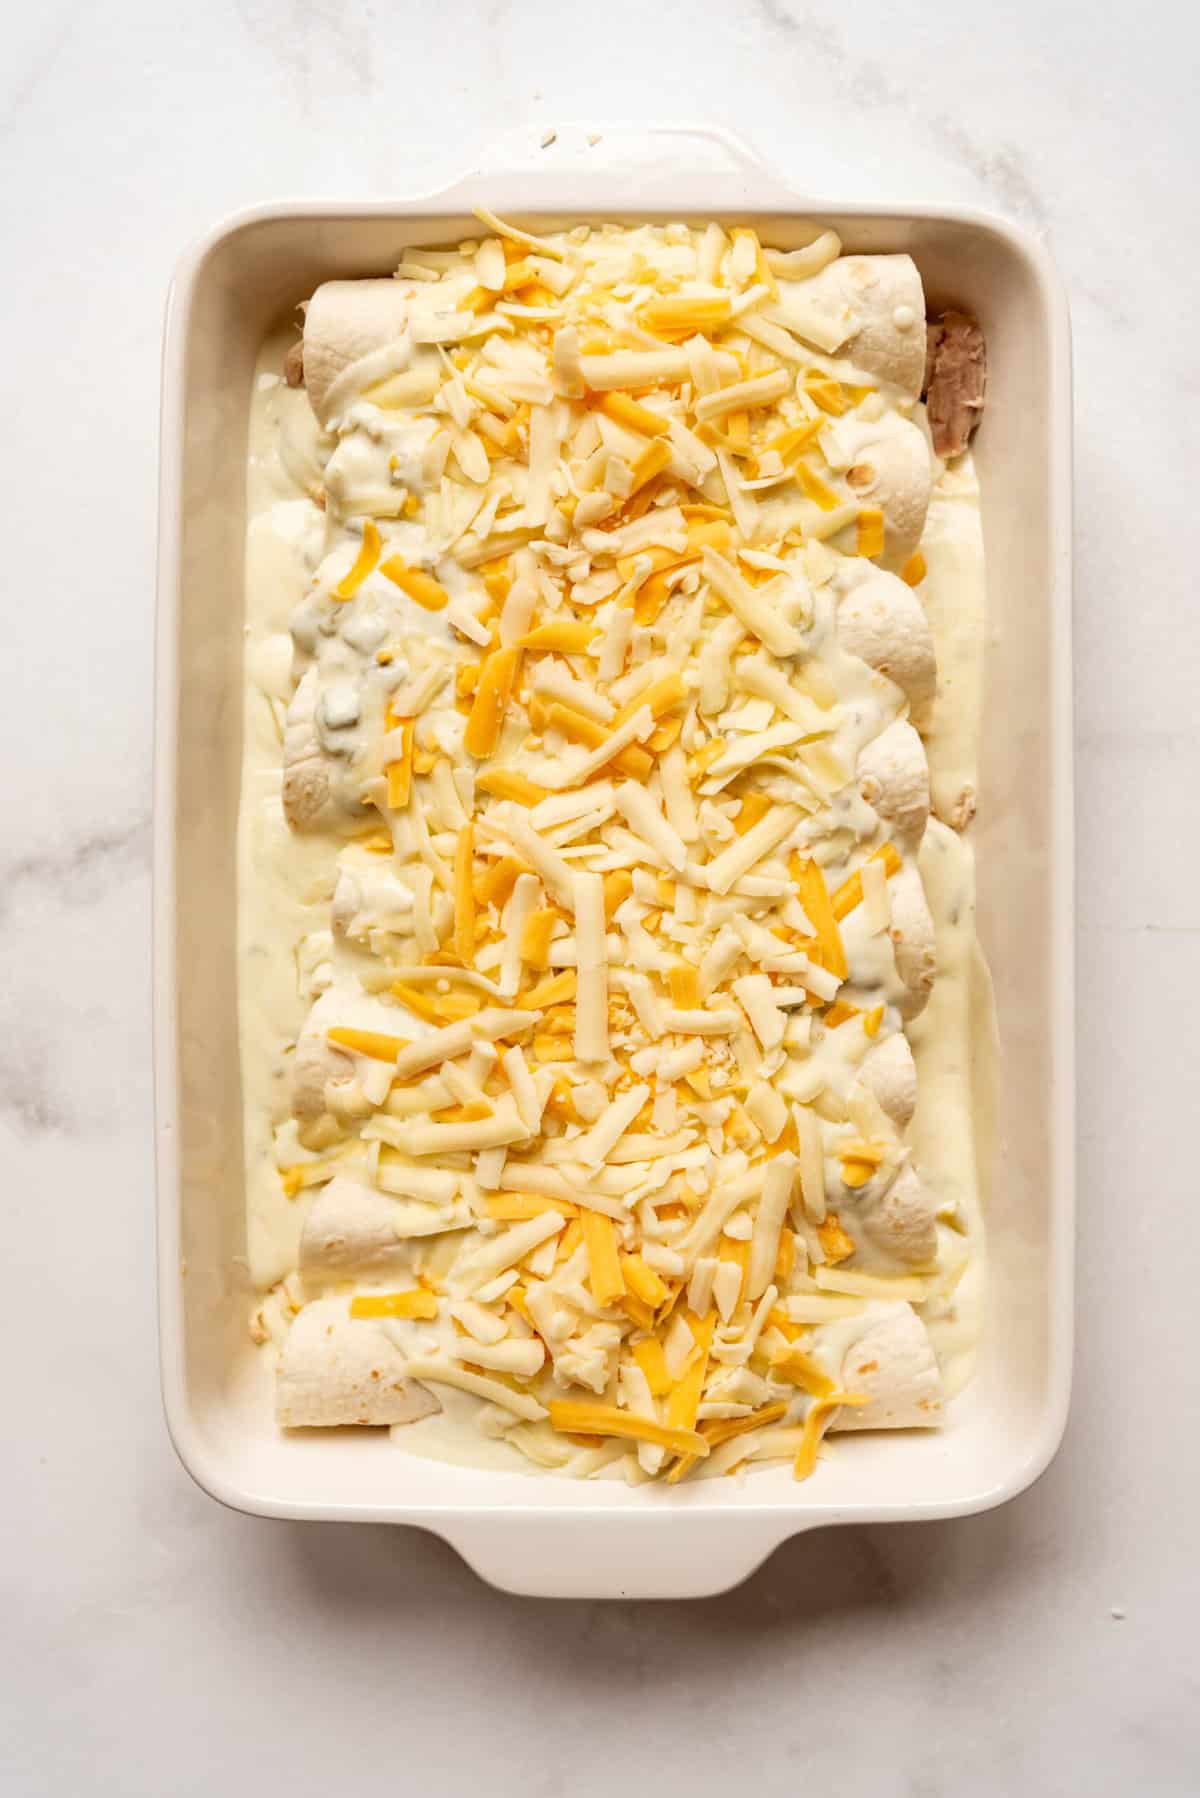 Topping chicken enchiladas with shredded cheese.